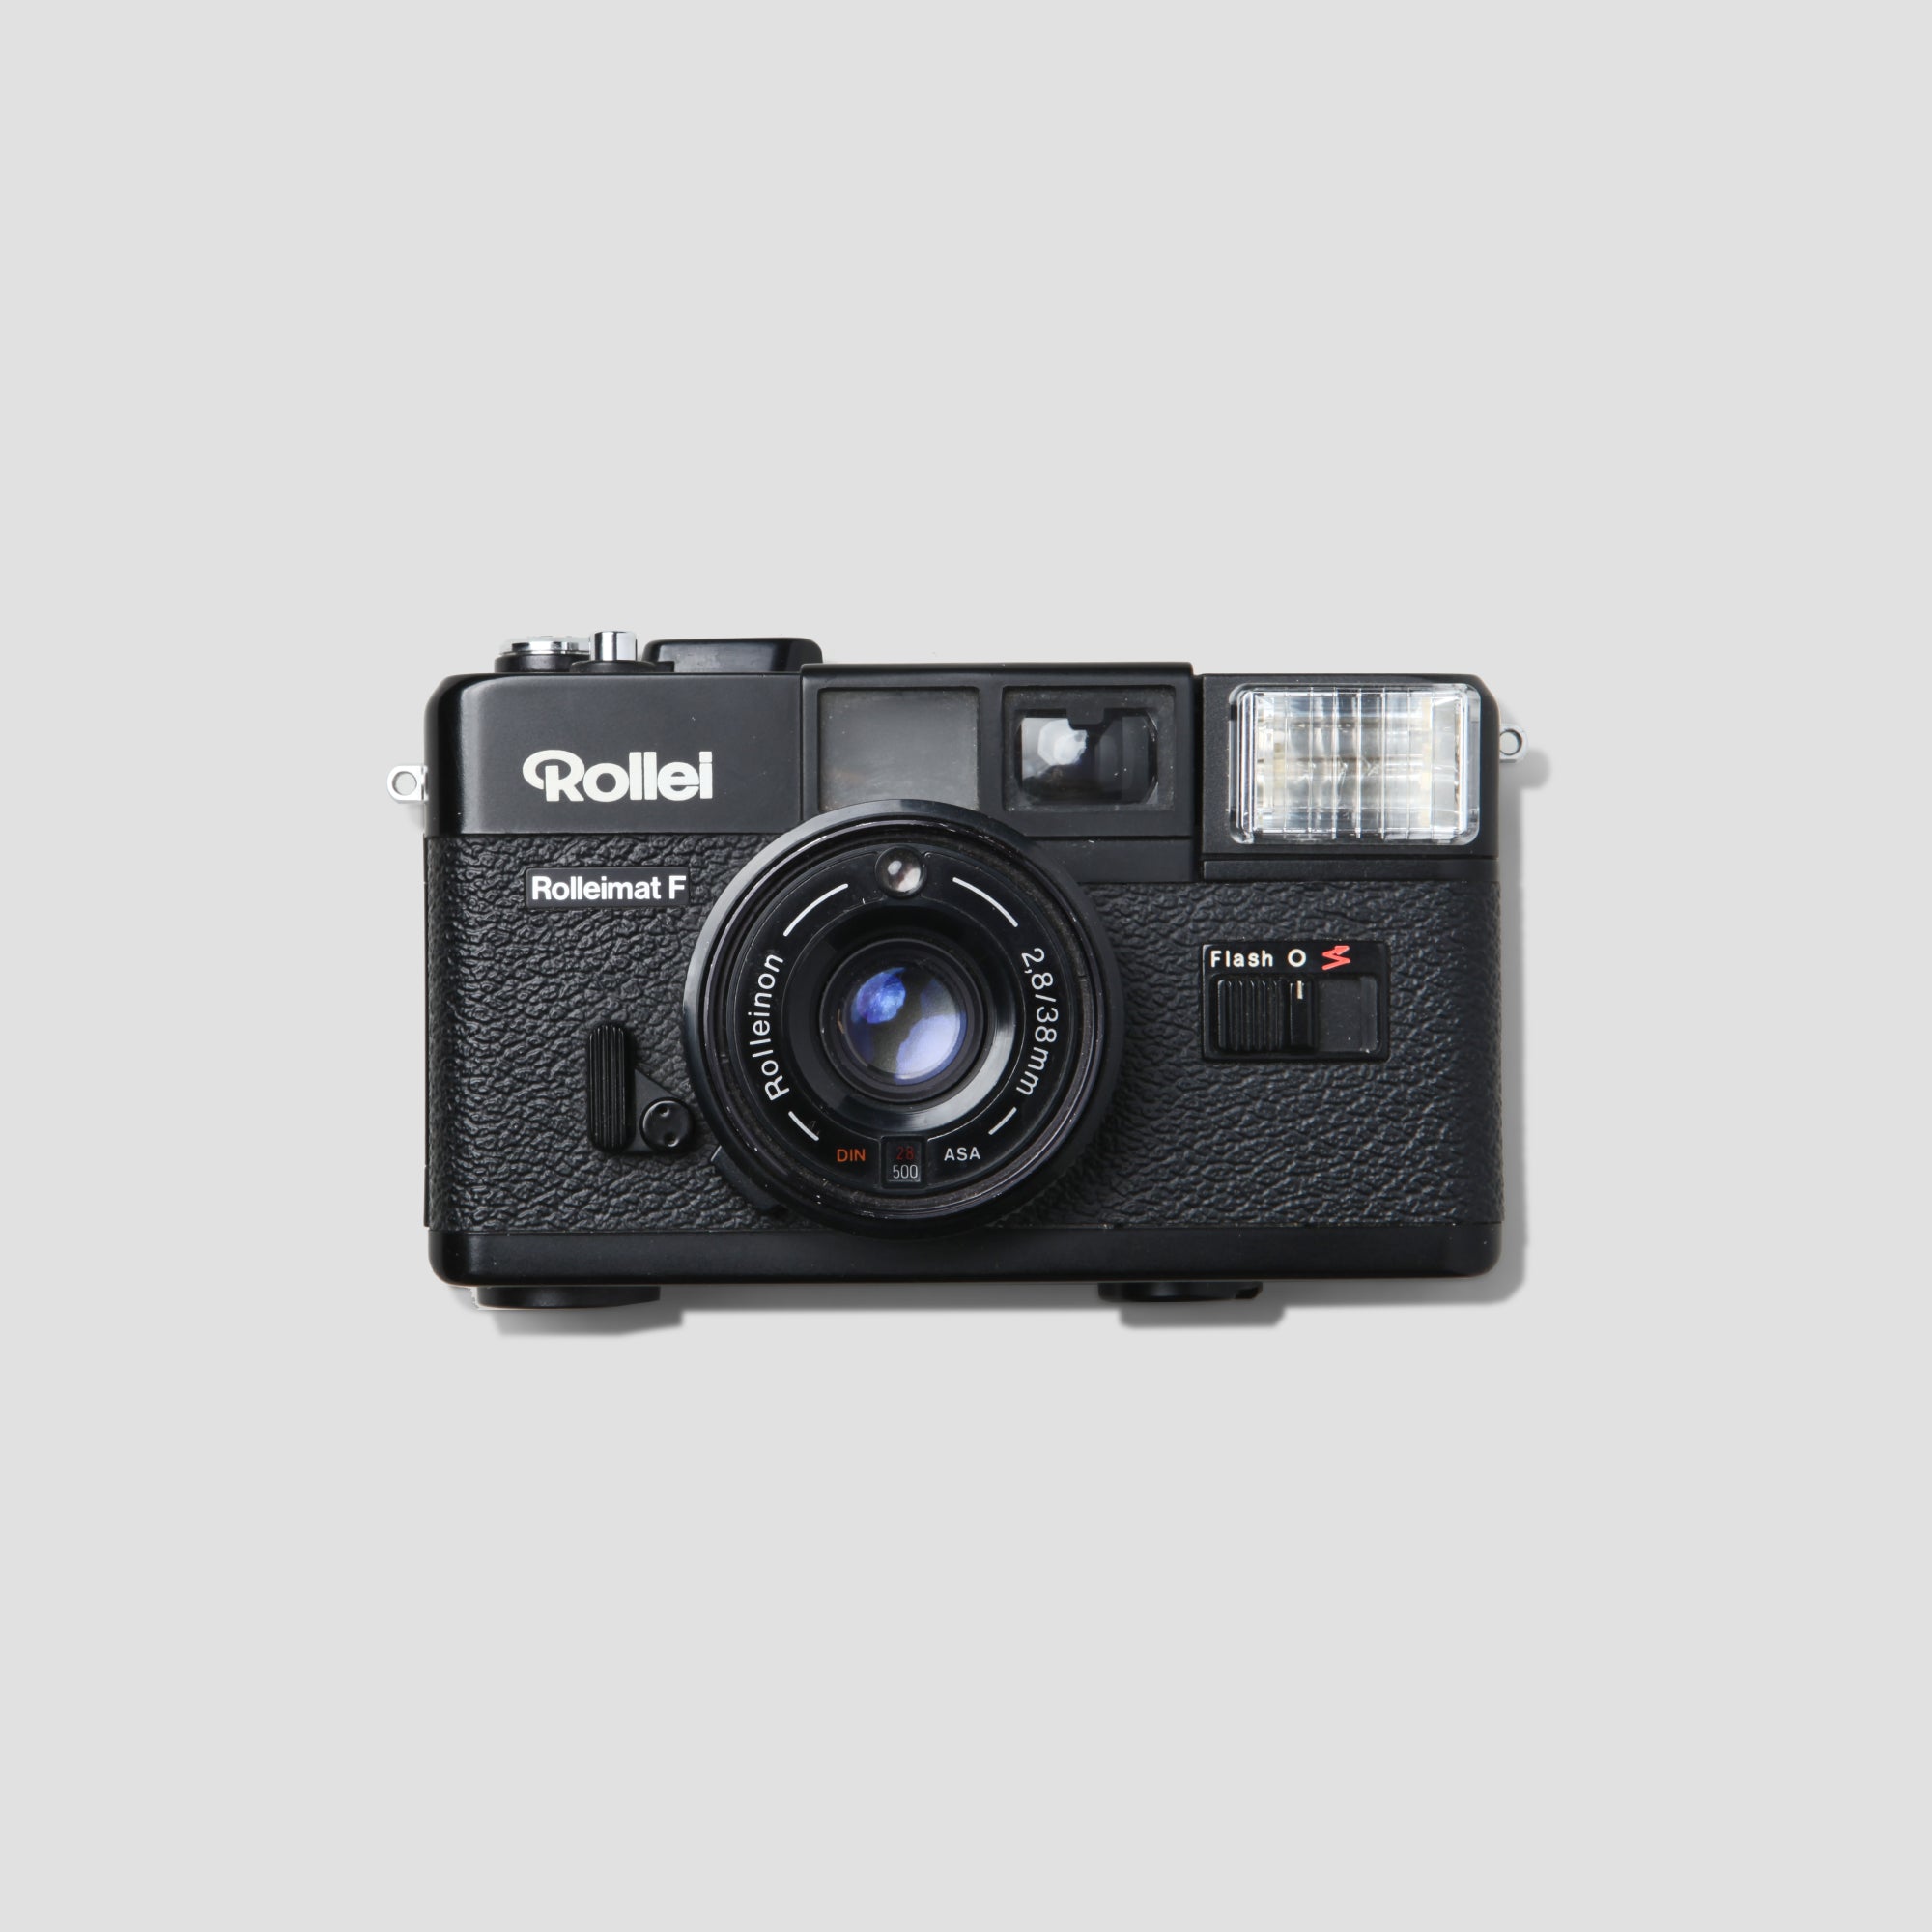 Buy Rollei Rolleimat F now at Analogue Amsterdam